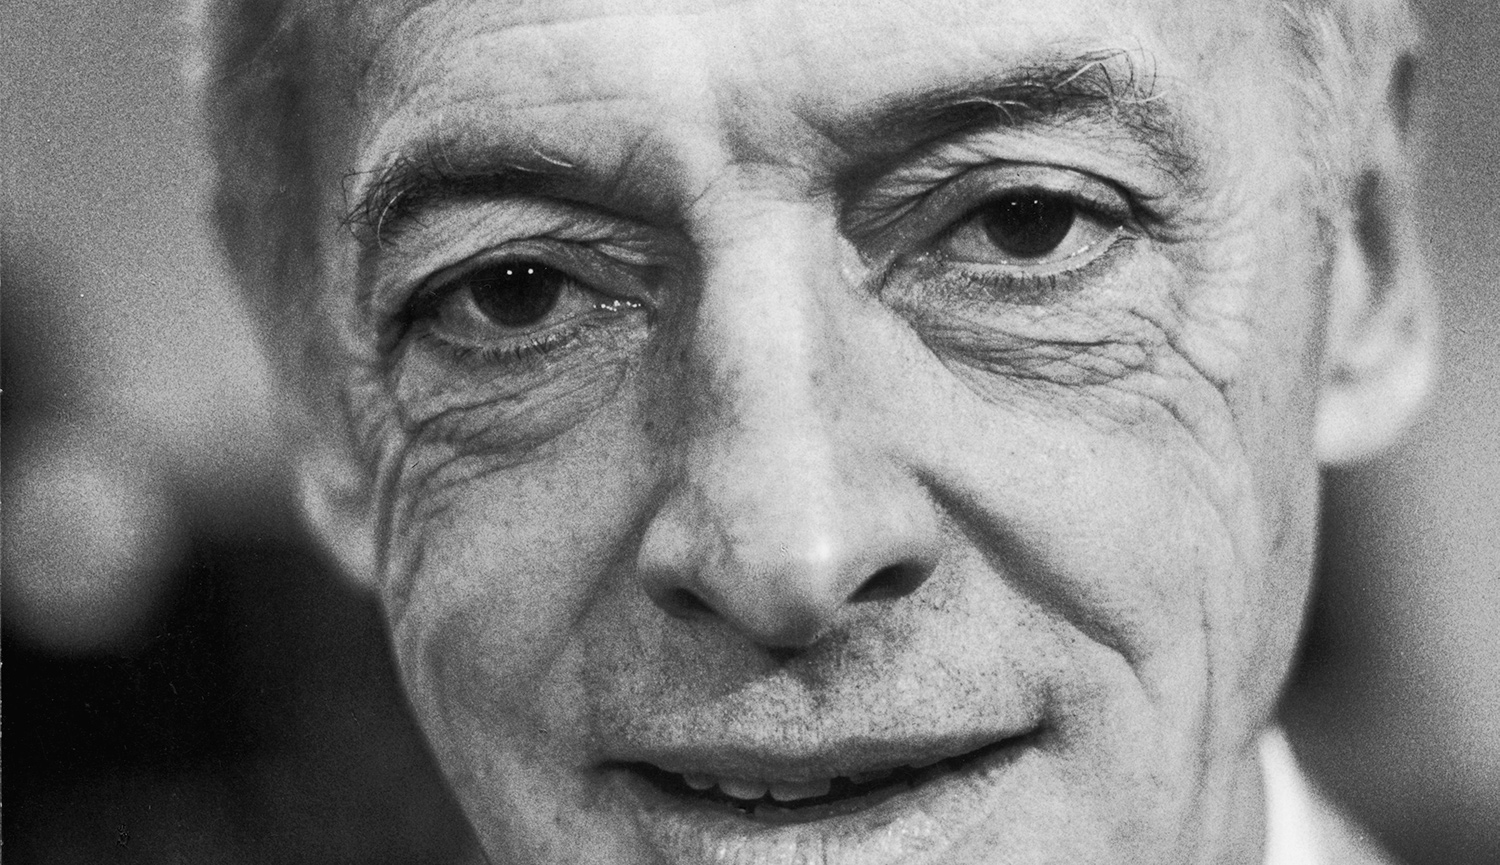 Saul Bellow shortly after he was awarded the Nobel Prize for Literature in 1976. Keystone/Getty Images.
